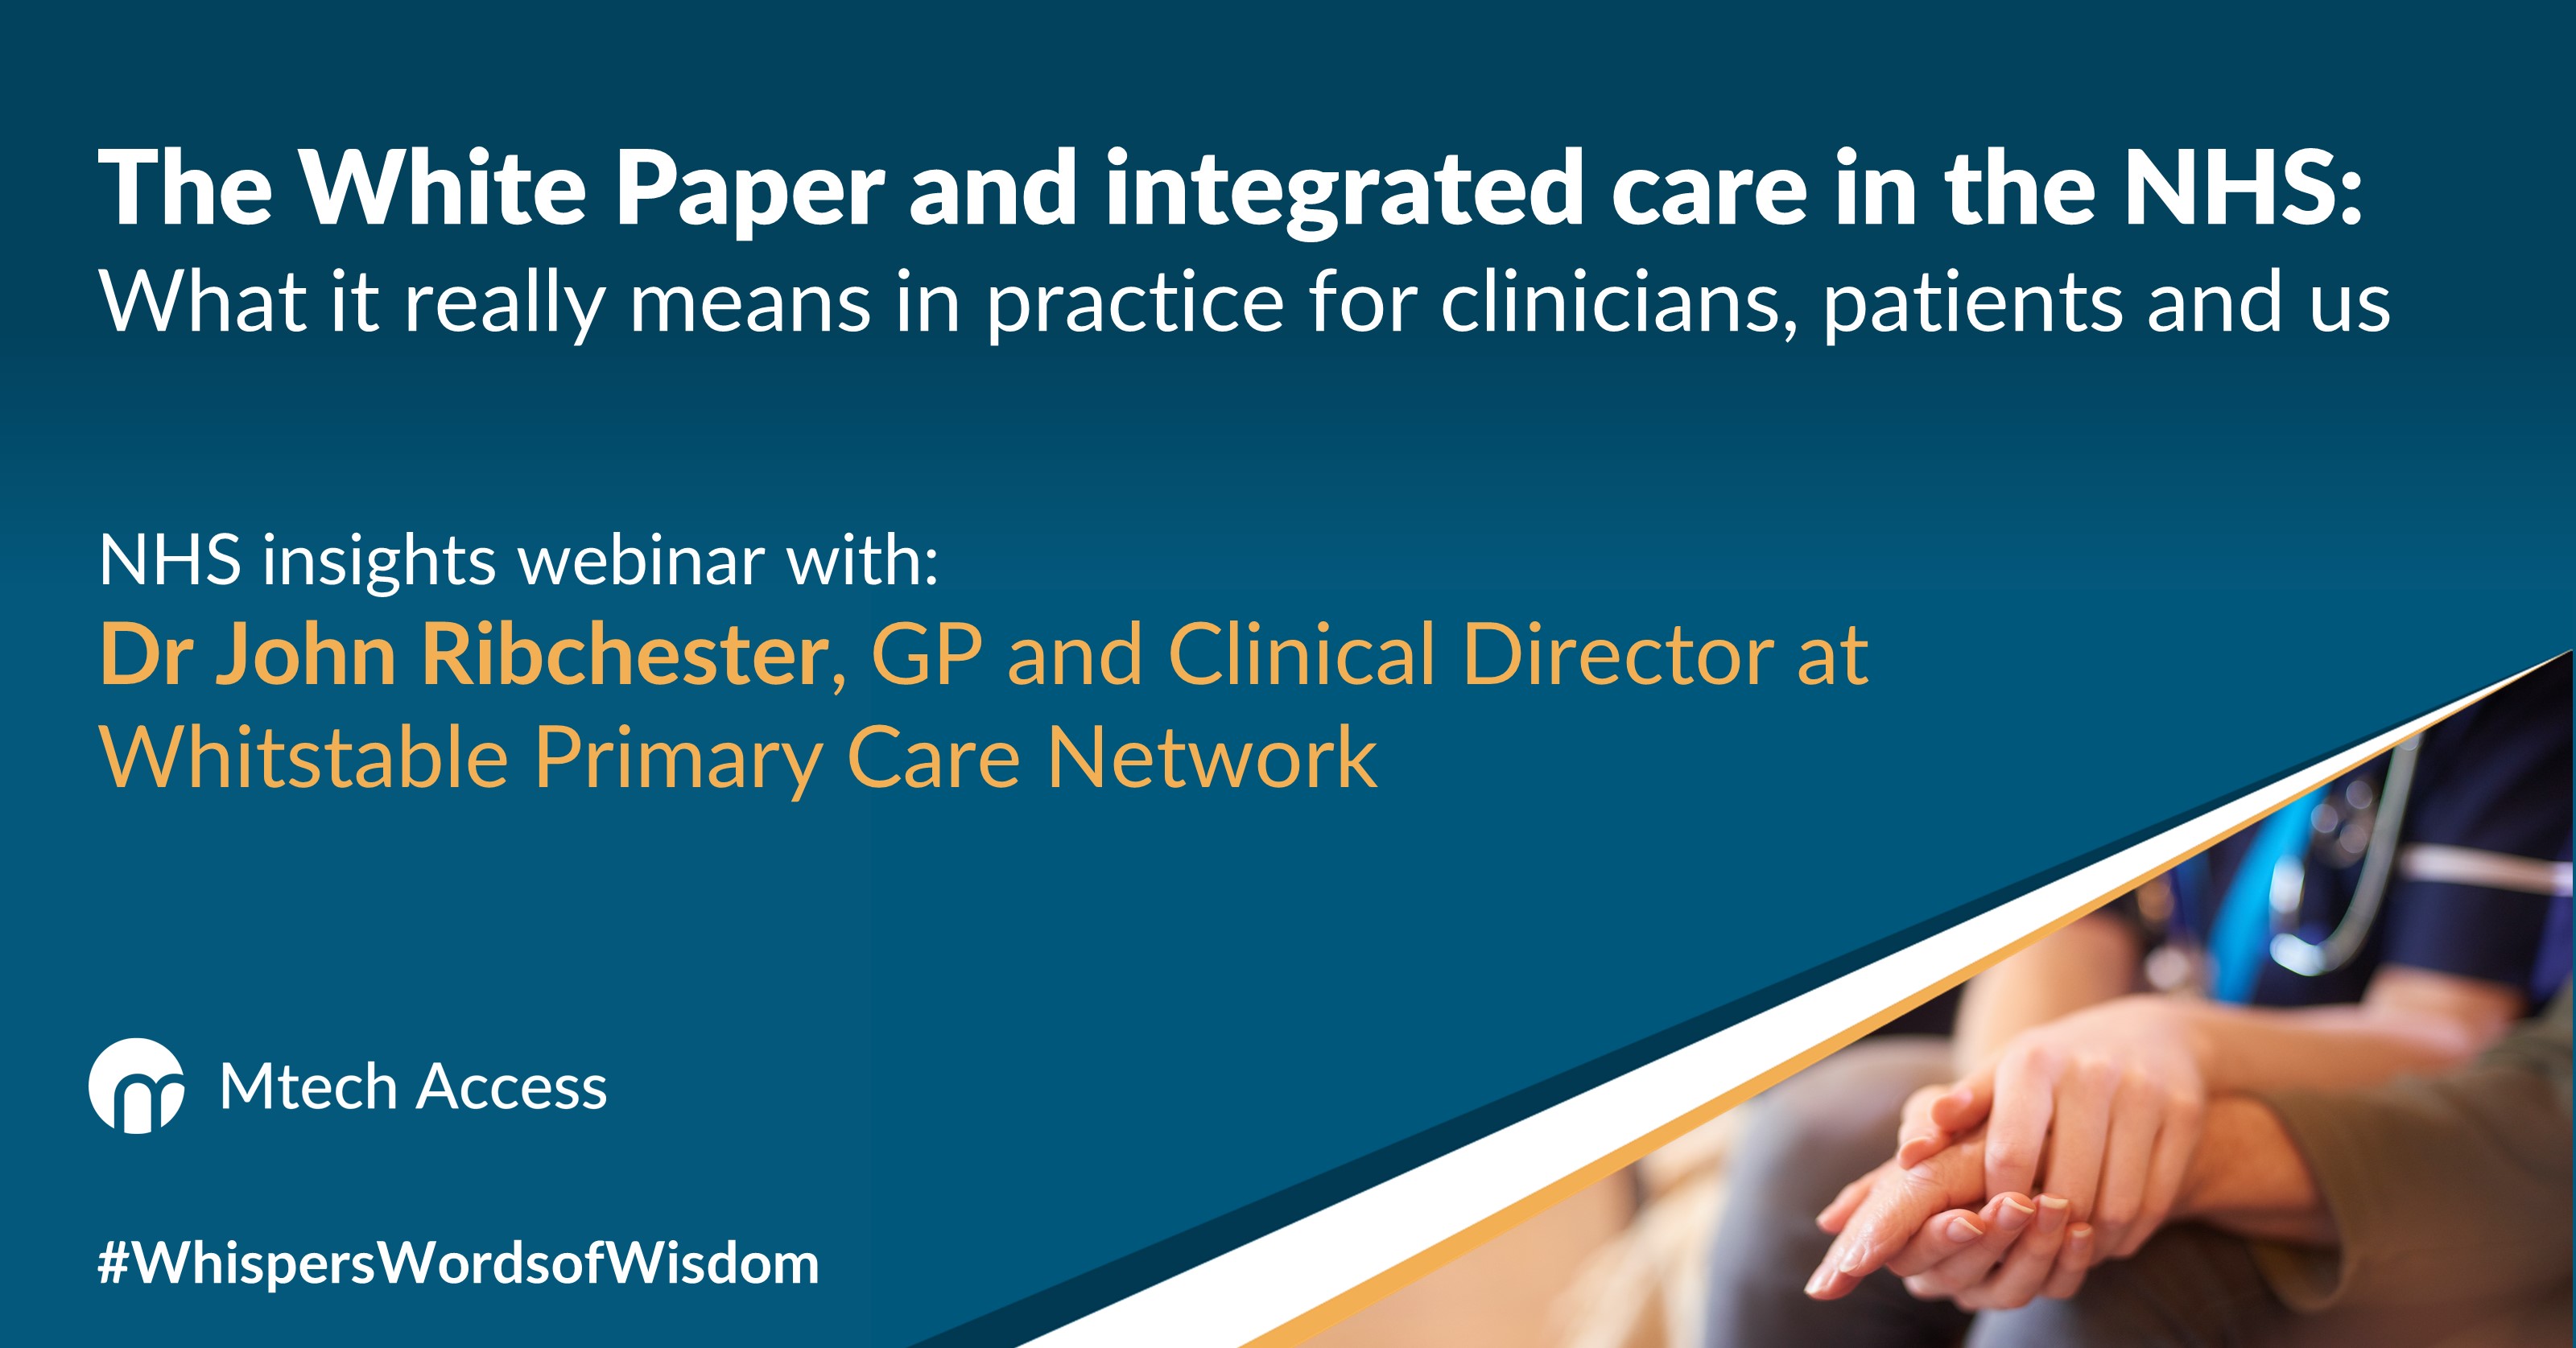 The White Paper and integrated care in the NHS: What it really means in practice for clinicians, patients and us. NHS insights webinar with: Dr John Ribchester, GP and Clinical Director at Whitstable Primary Care Network